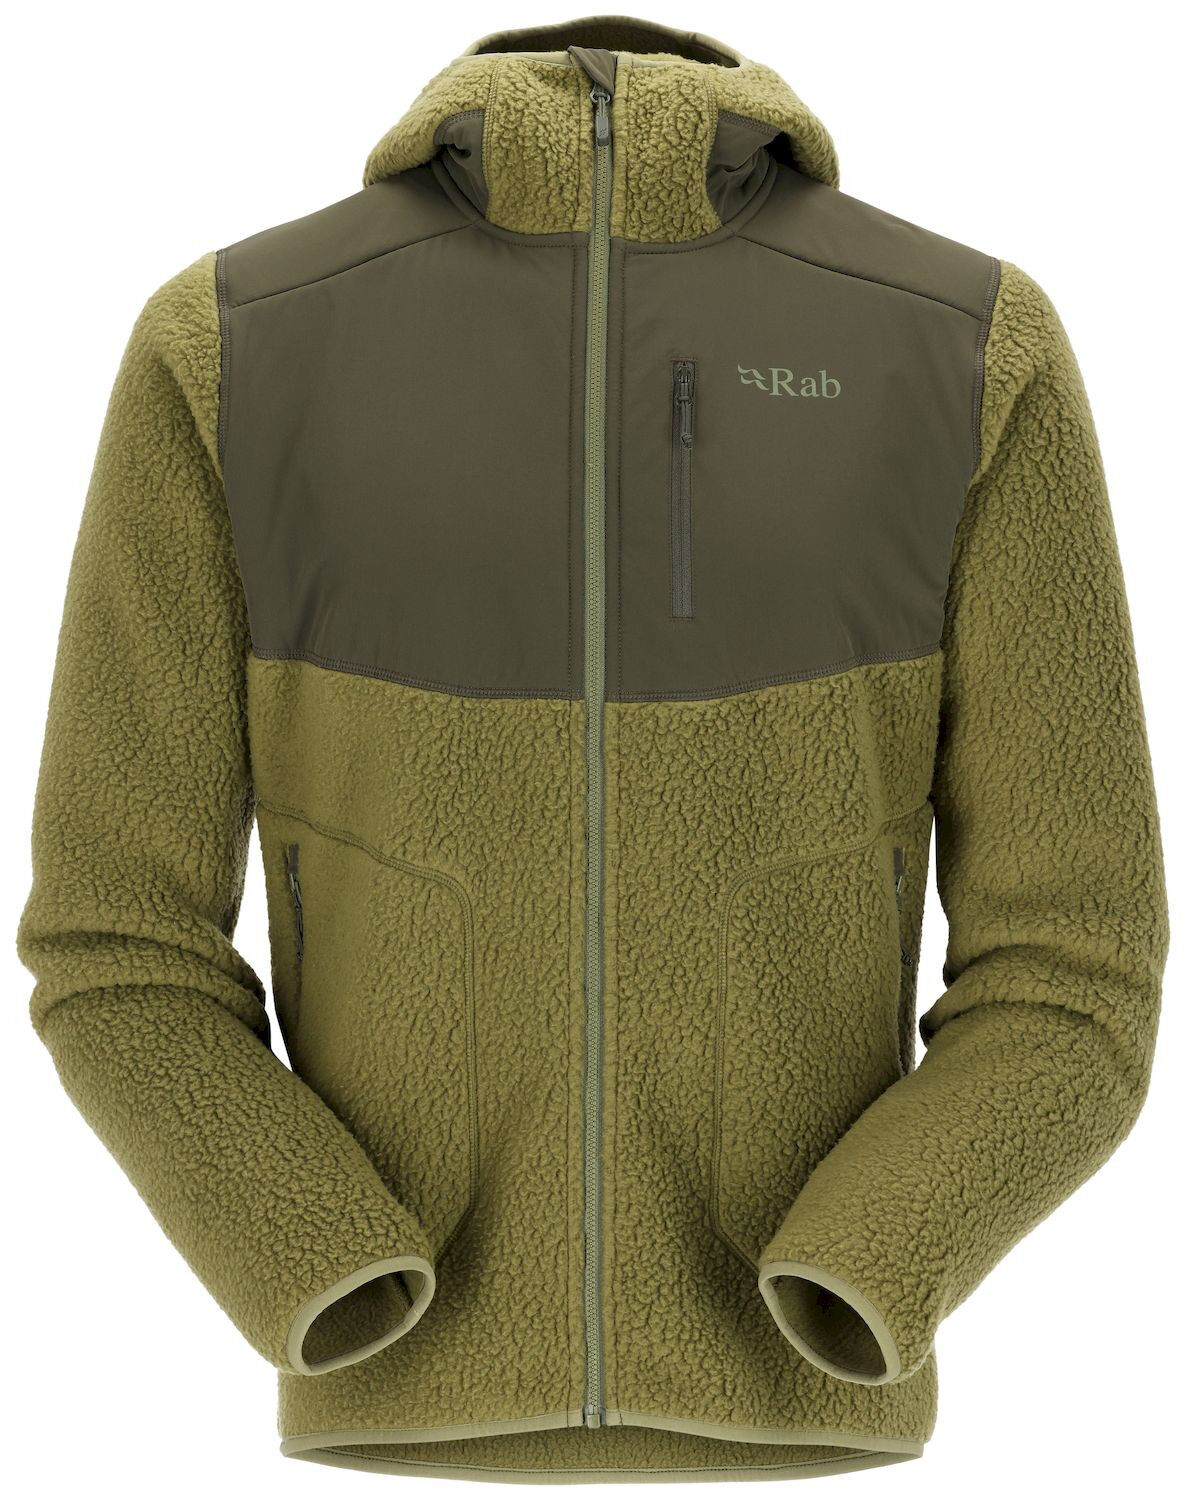 Rab Outpost Hoody - Giacca in pile - Uomo